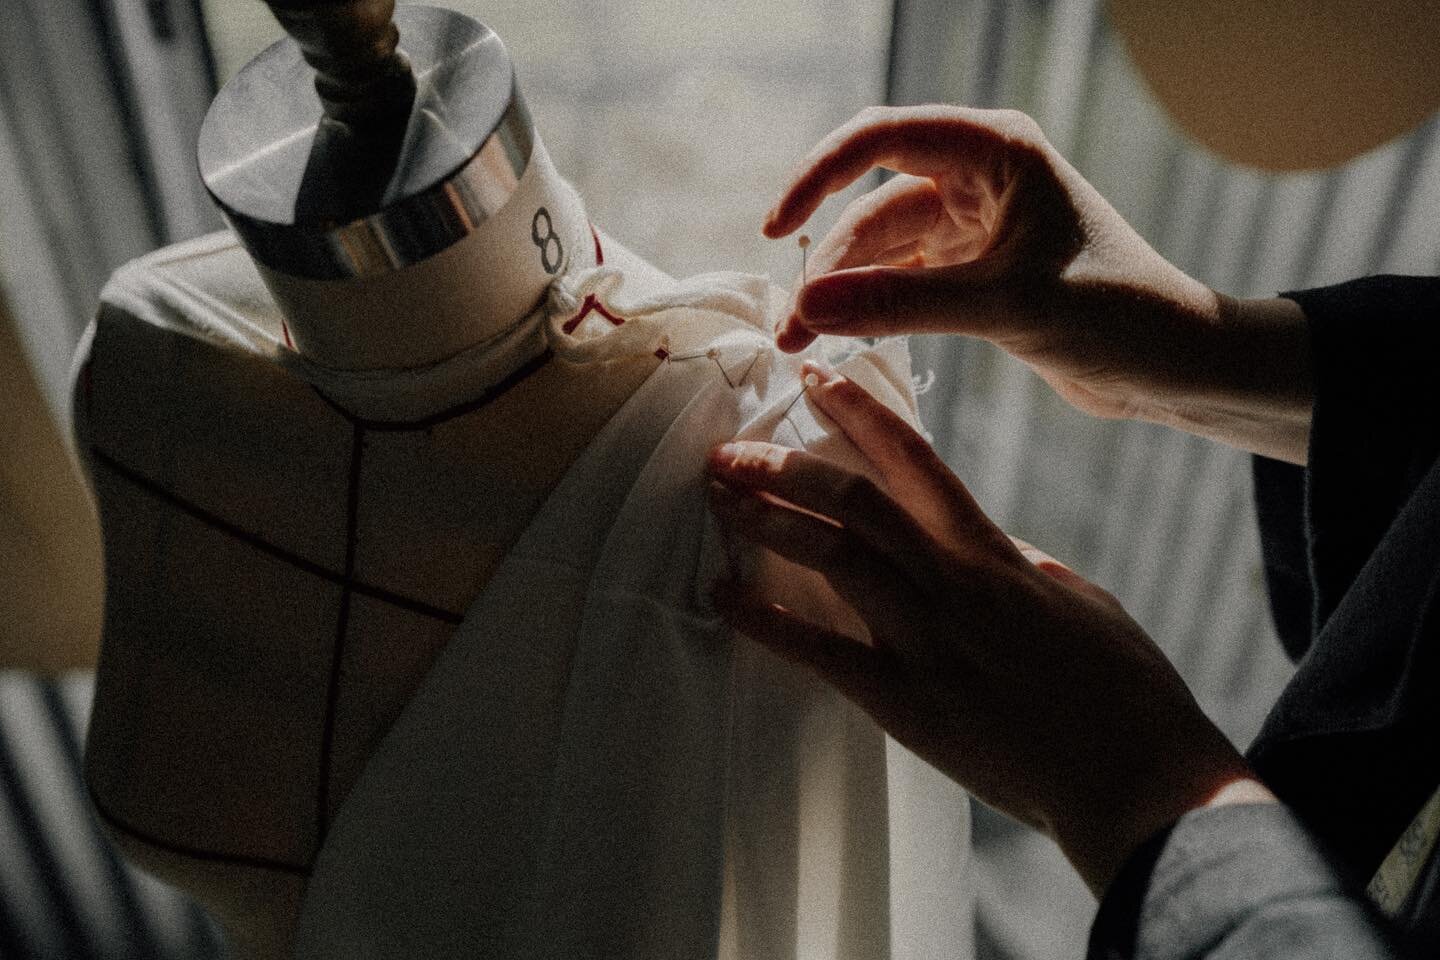 Did you know we offer a bespoke bridal dressmaking service? 

When we are not working on our ready to wear collections, sleeves are rolled up working away on elegant, one of a kind gowns for the modern bride.

Each garment is made by hand in our stud